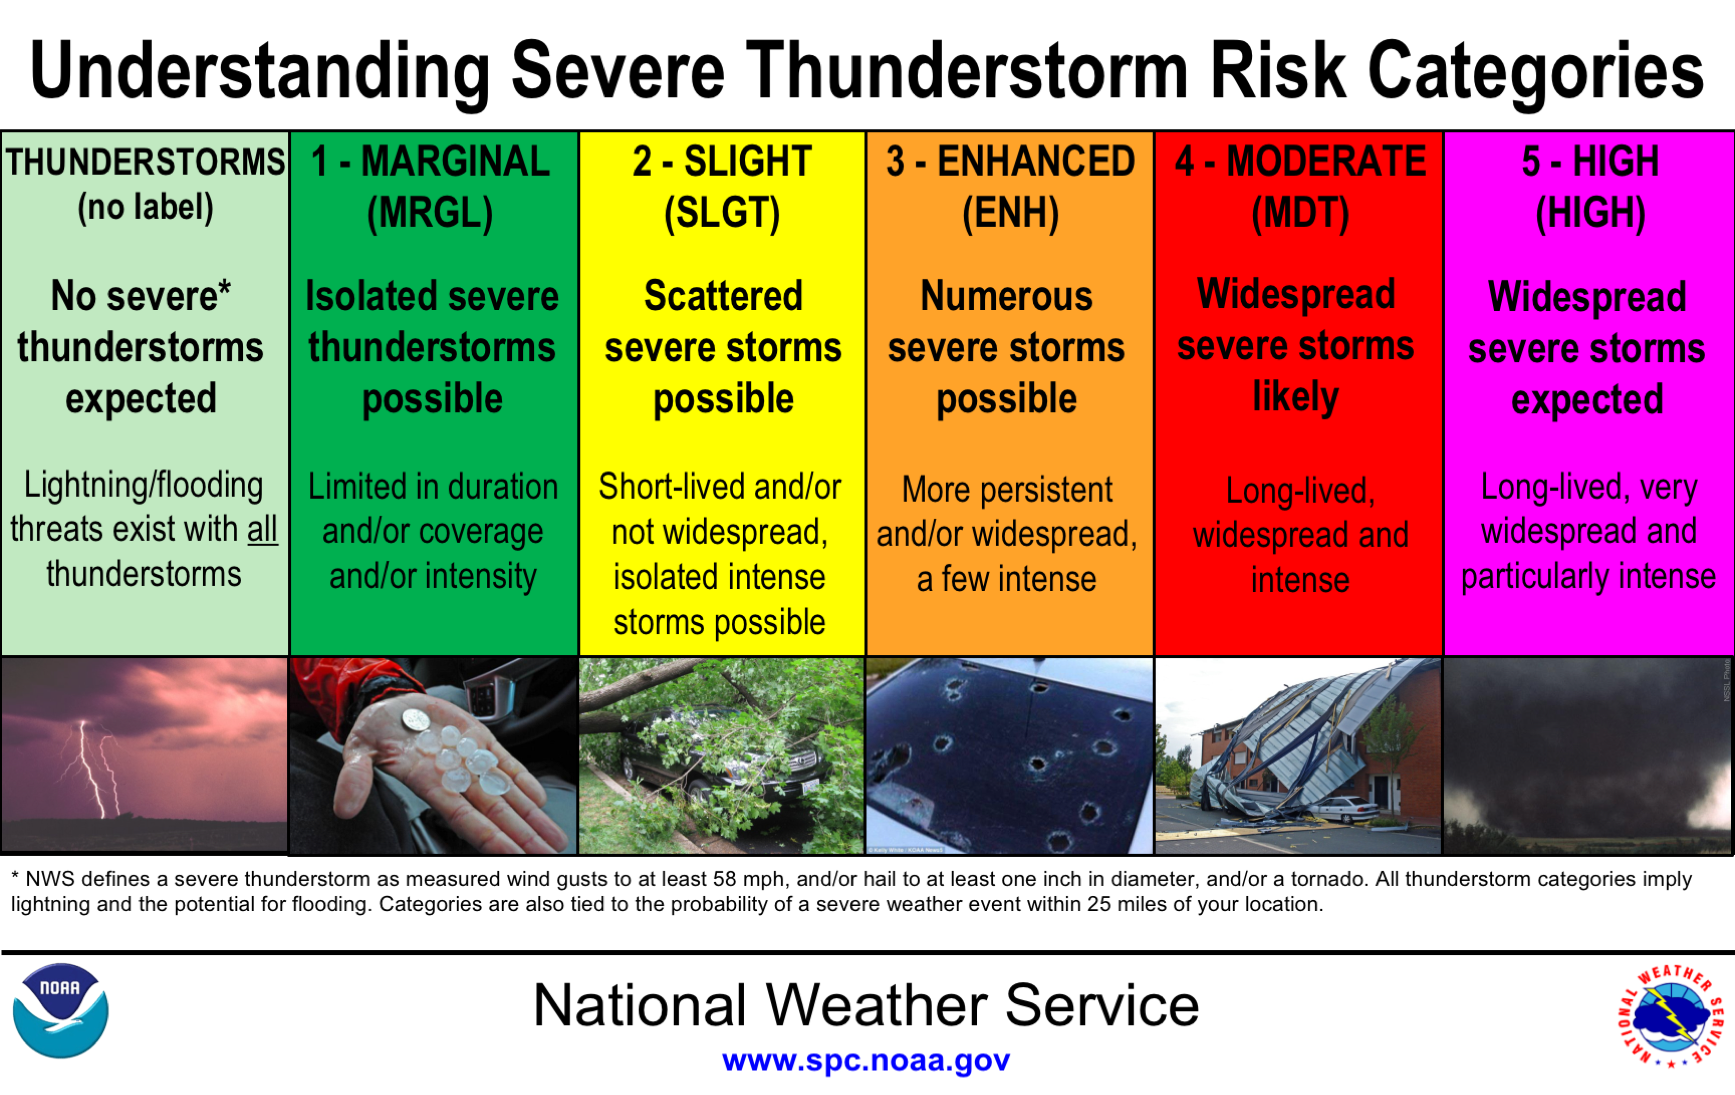 More Information on Today's Severe Weather Threat